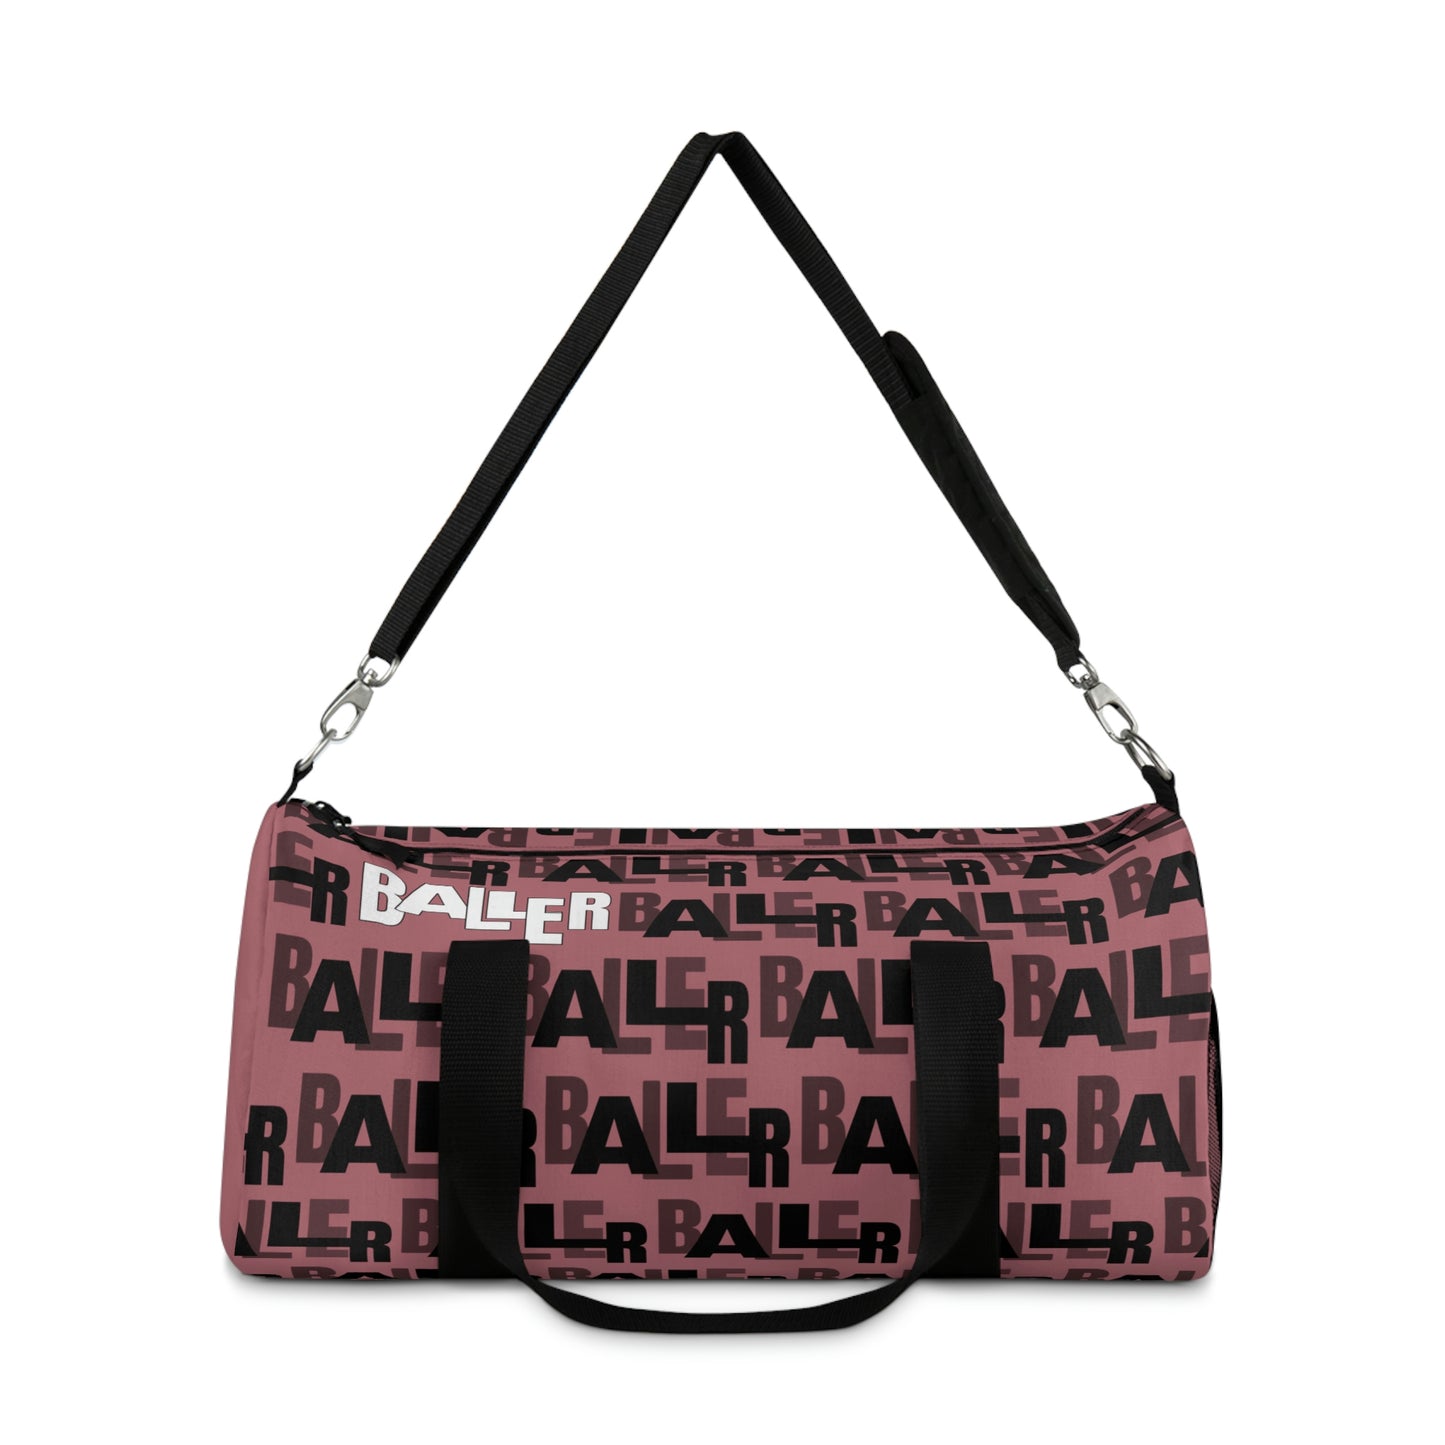 Pink duffle bag with "baller" written in black text around the bag. "Baller" is written once in white on the top left of the bag. Two hand straps and an arm strap